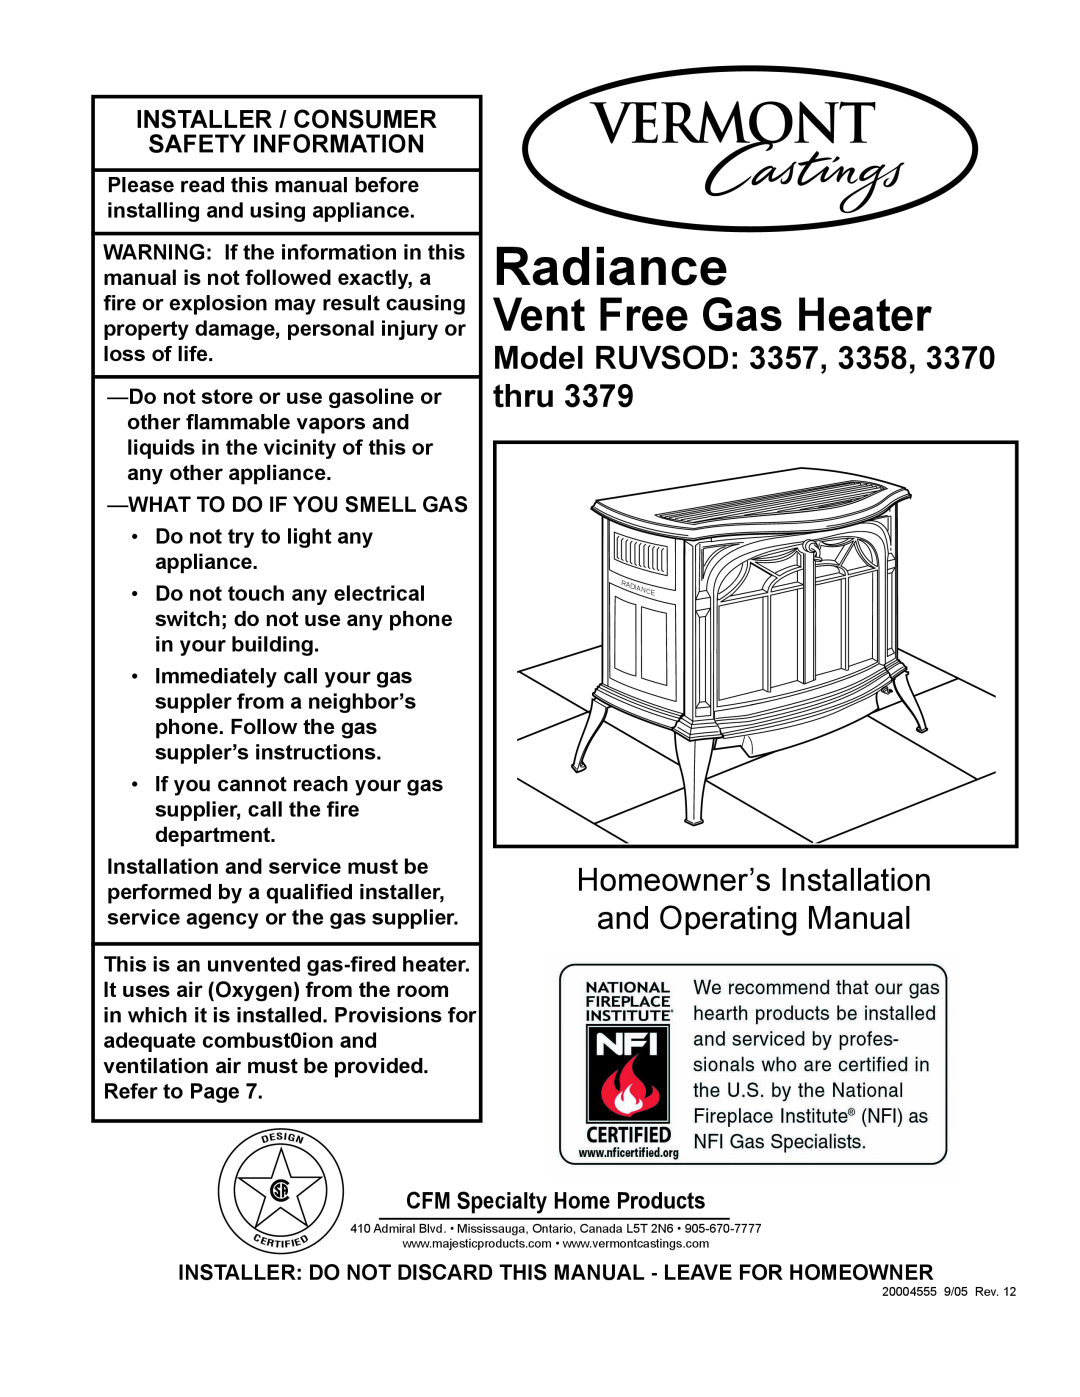 Vermont Casting thru 3379, RUVSOD: 3357 manual Model RUVSOD 3357, 3358, 3370 thru, CFM Specialty Home Products, Radiance 